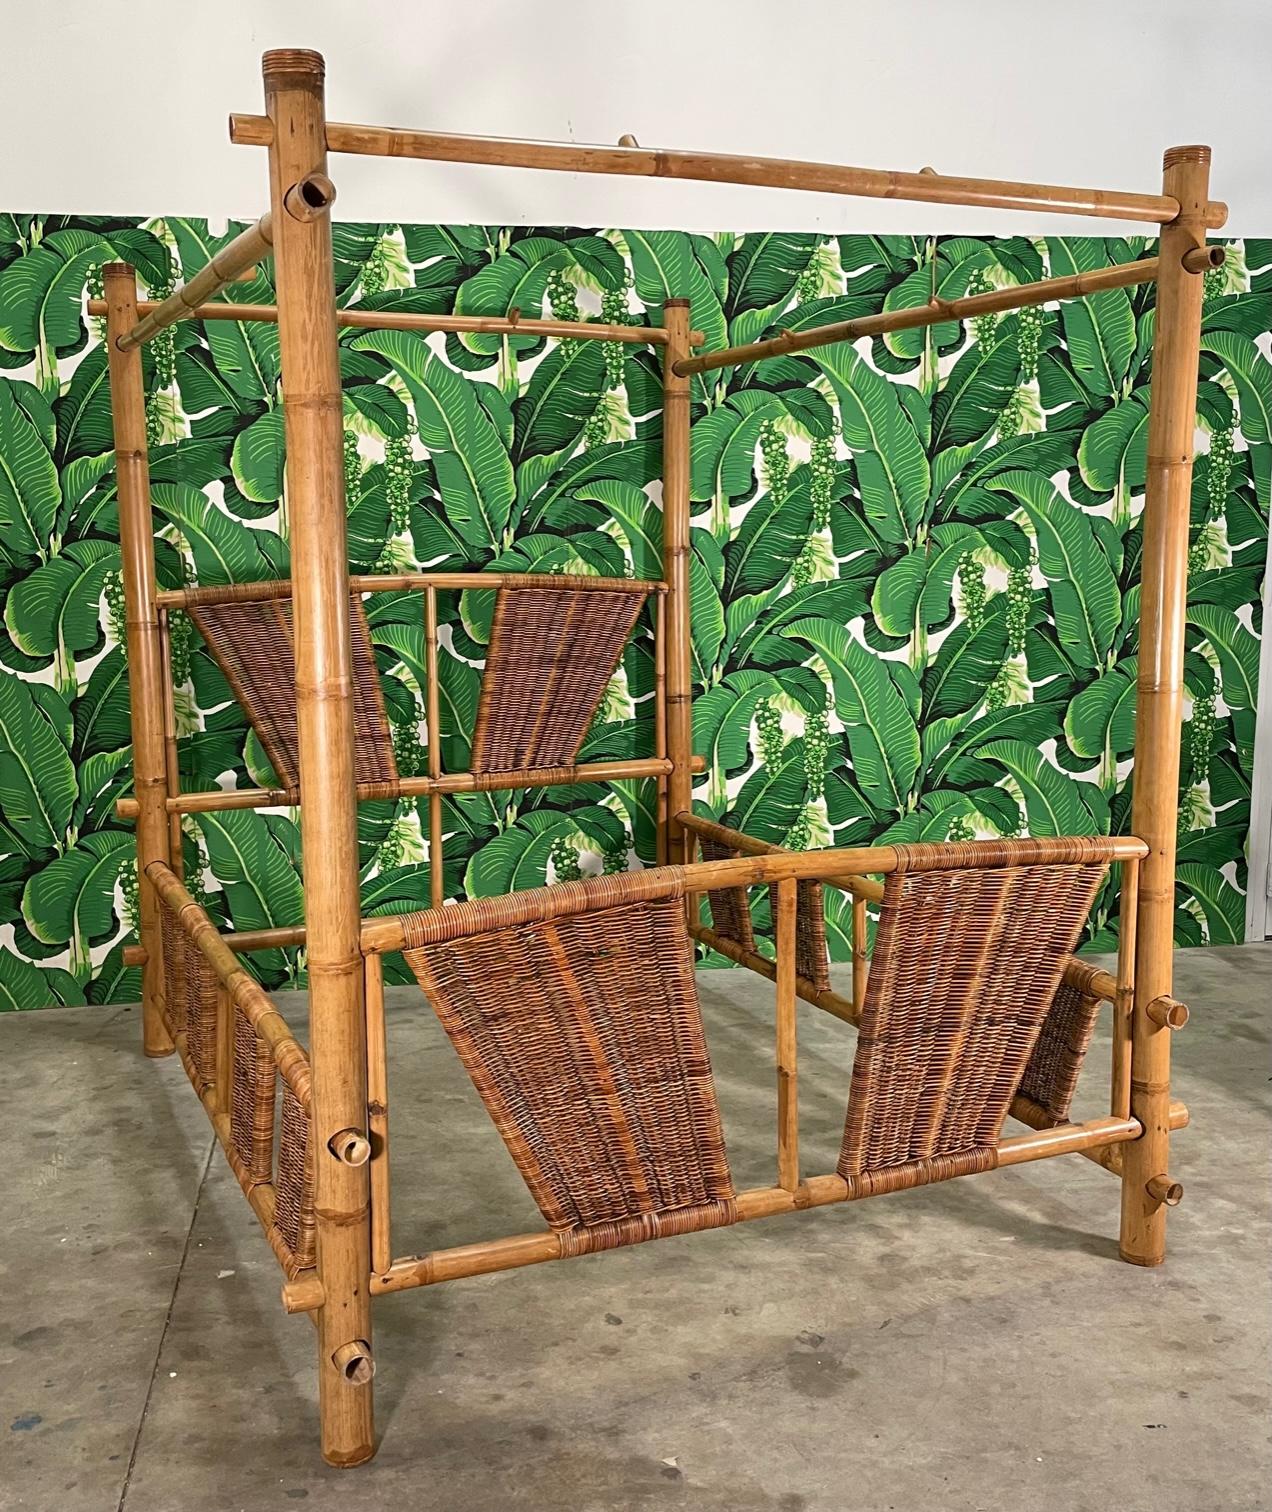 Queen size canopy/poster bed constructed from oversized bamboo.. Rattan detailing woven throughout. Good vintage condition with imperfections consistent with age and use. May exhibit scuffs, marks, or wear, see photos for details. One top rail has a